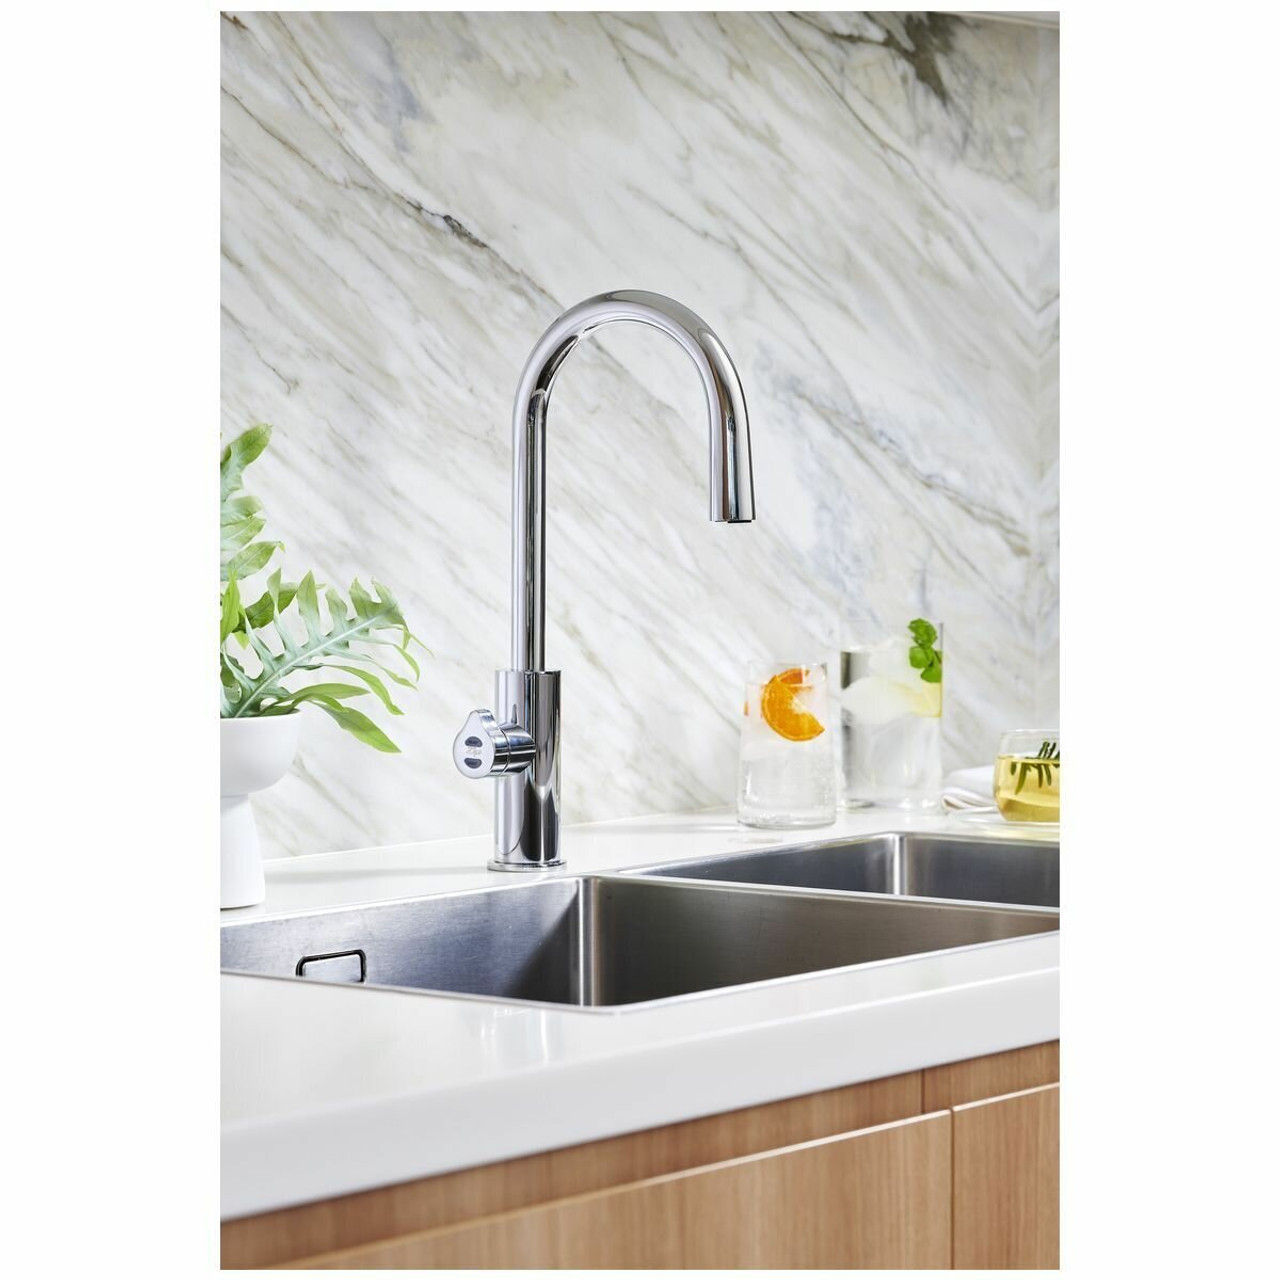 H5L784Z00AU - Zip HydroTap G5 Home Arc Plus Boiling & Chilled Filtered Tap - Chrome